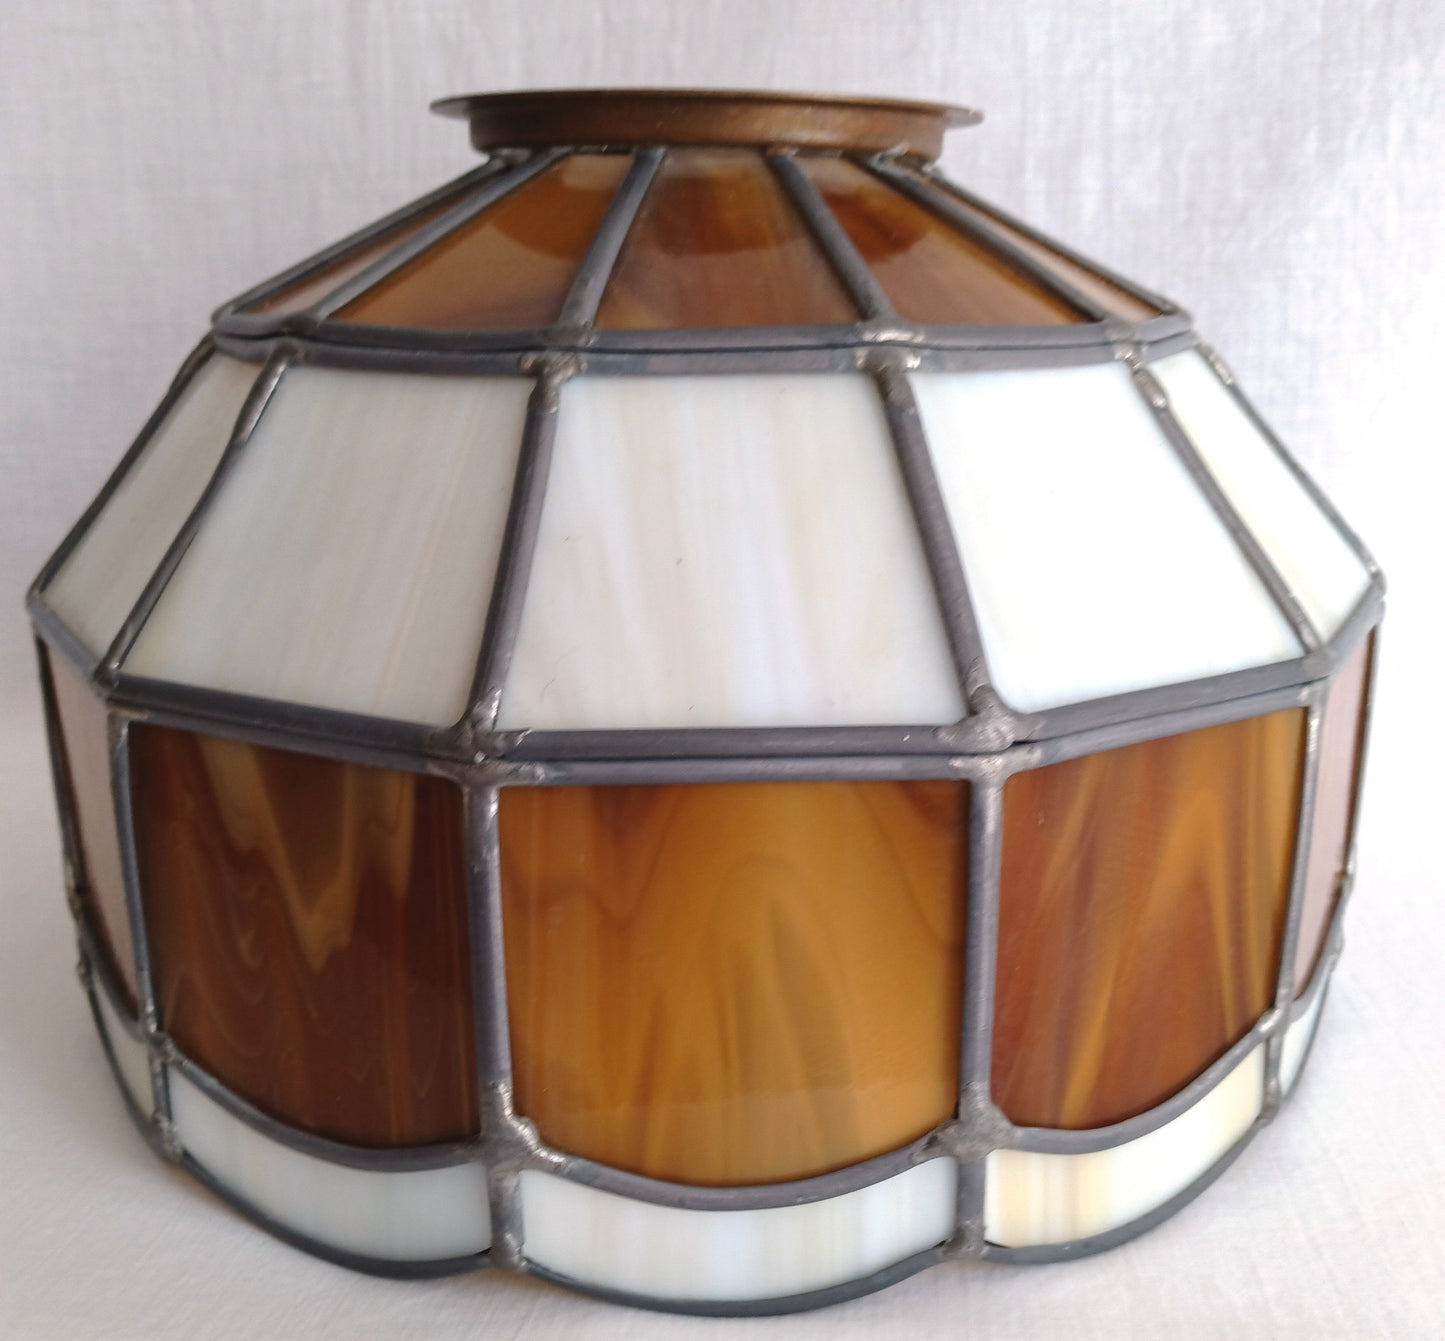 Vintage Handcrafted Hanging Lampshade Tiffany Style Leaded Stained Slag Glass Cream Brown Dome Shape Replacement Globe Ceiling Pendant